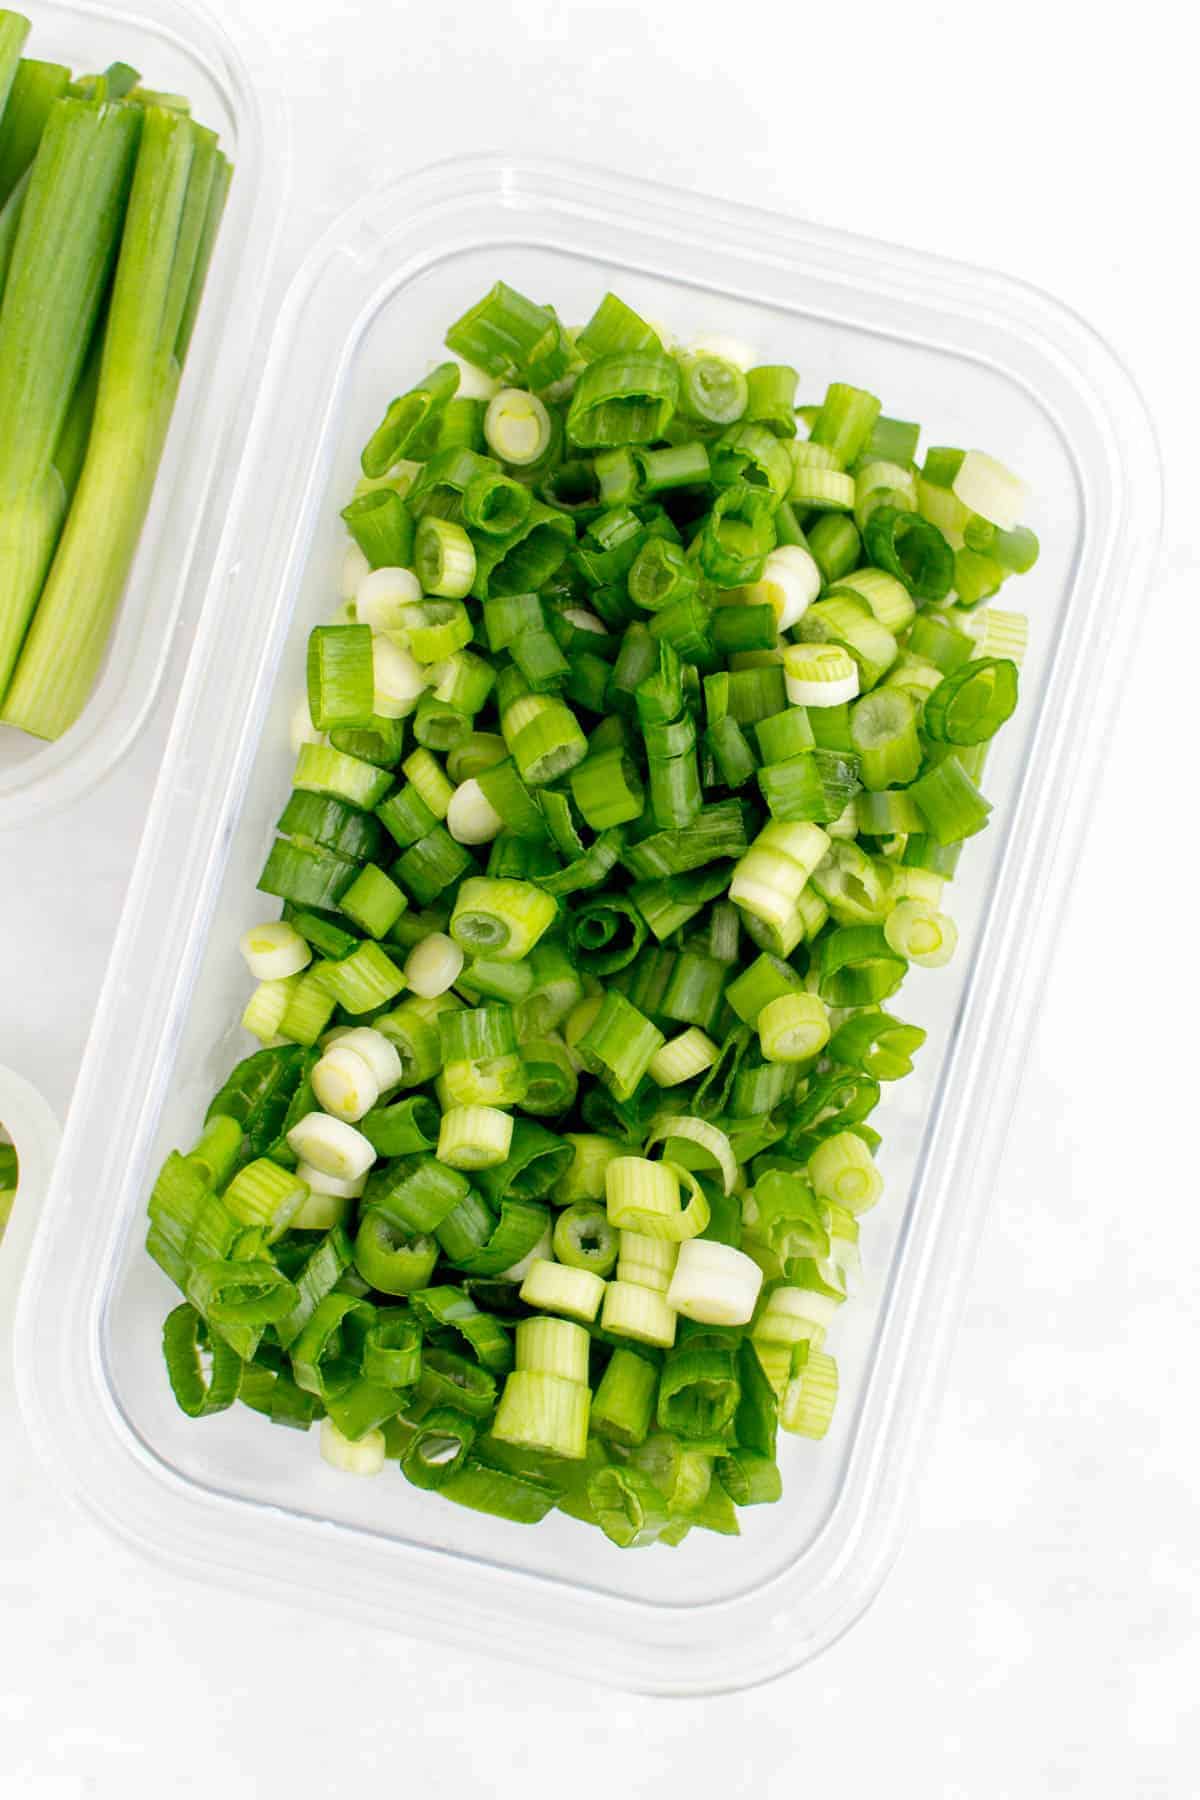 How To Freeze Green Onions 2 